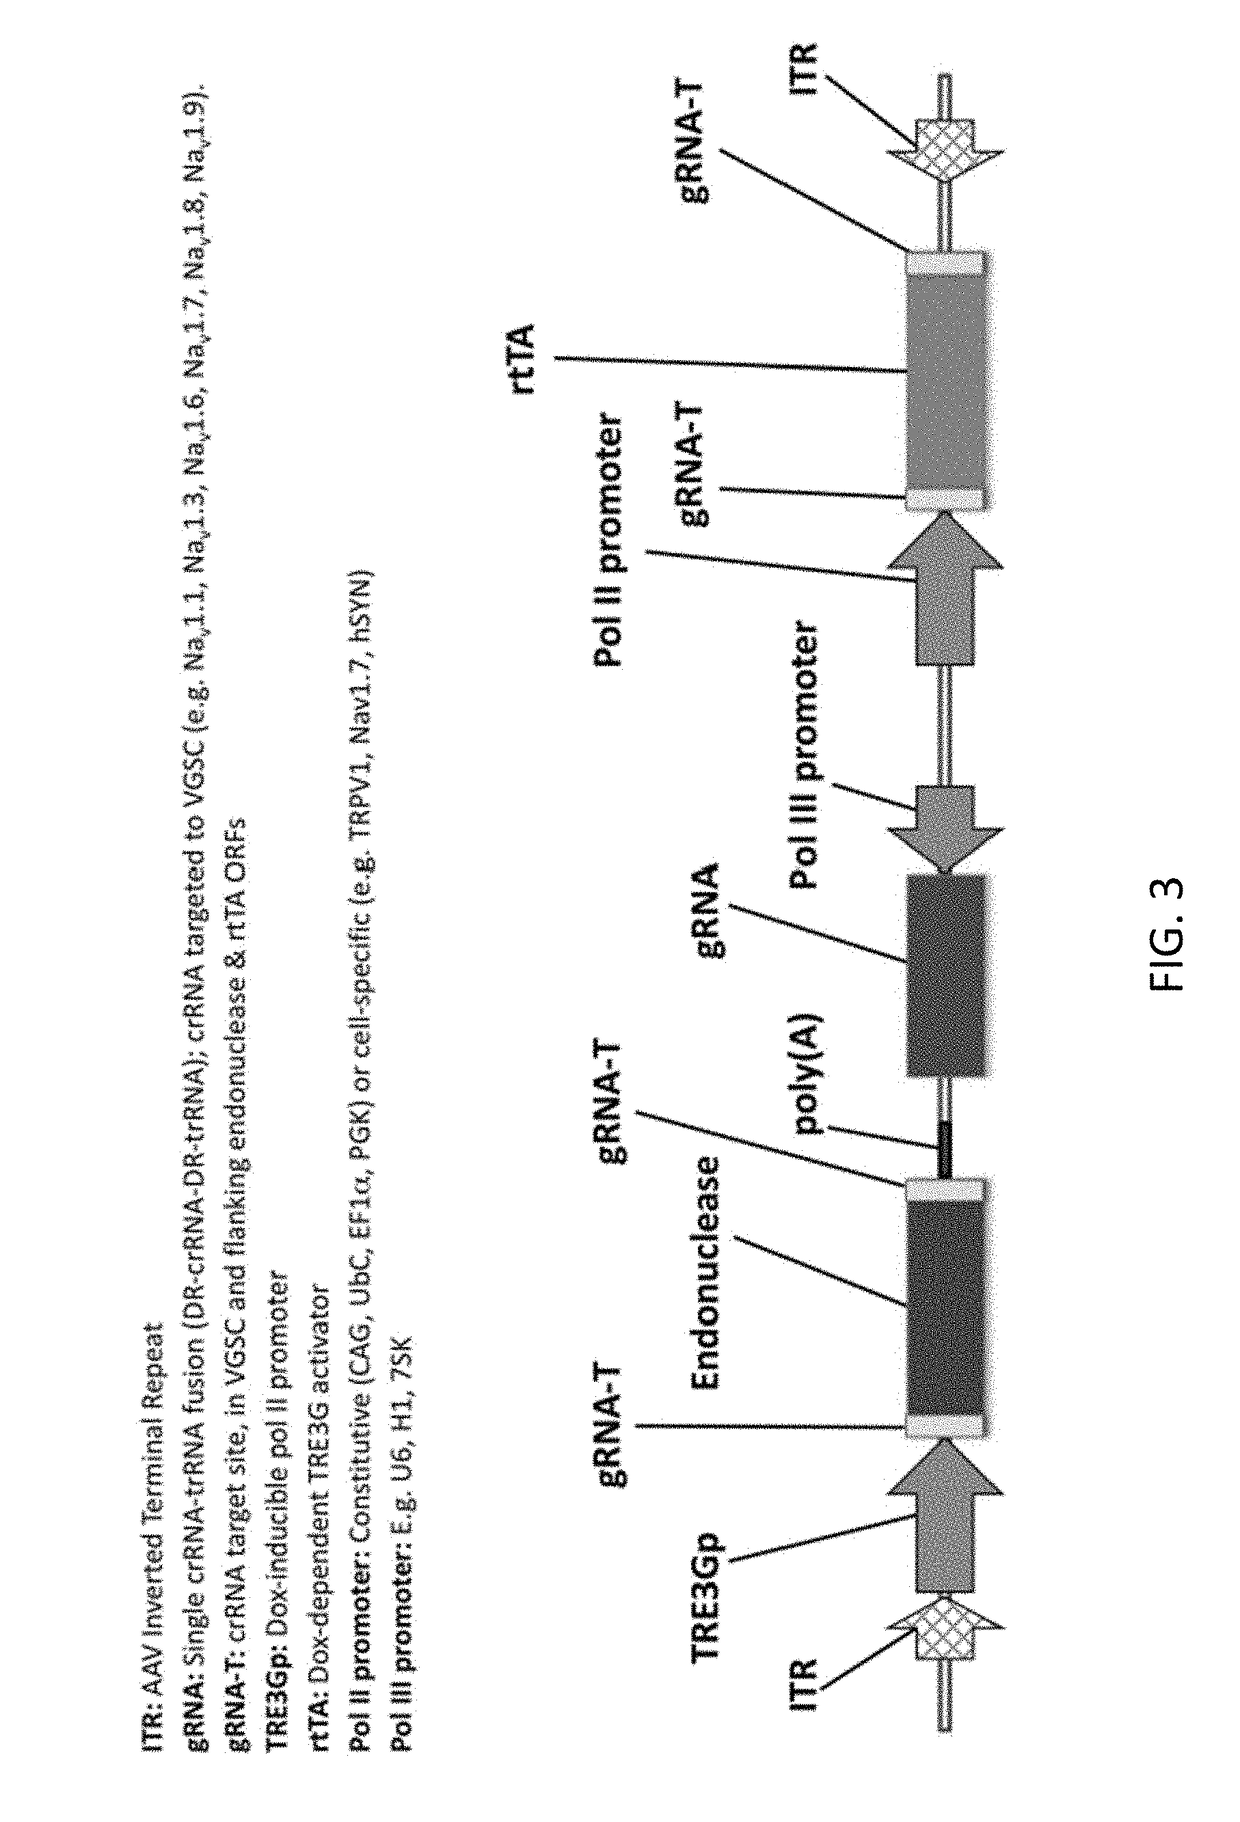 Crispr compositions and methods of using the same for gene therapy